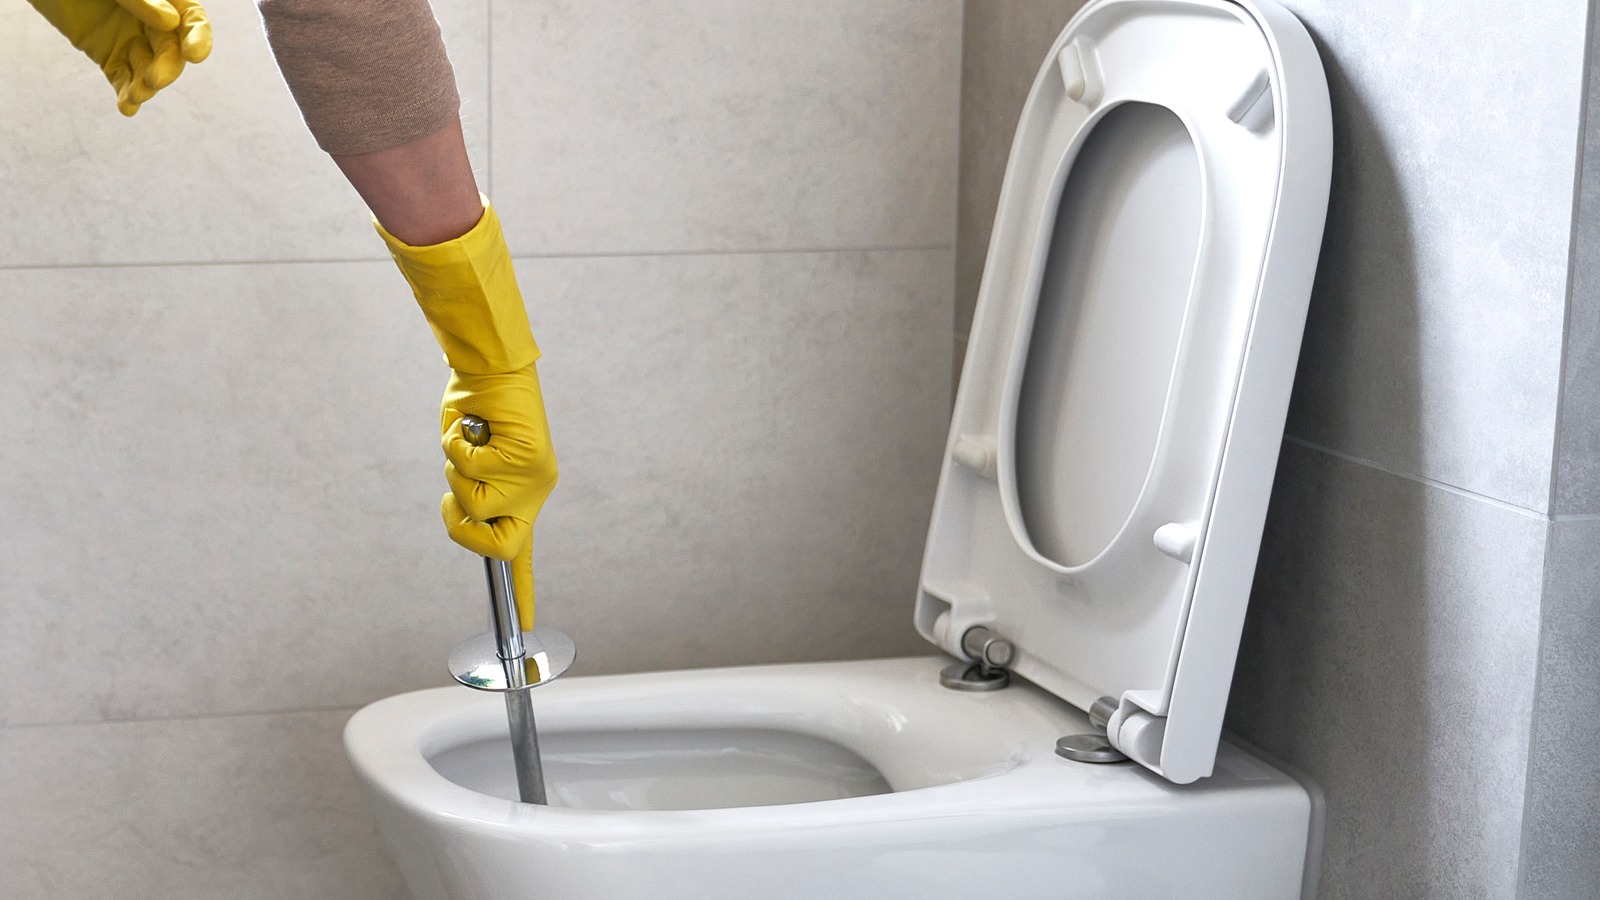 How To Remove Tough Stains In Toilet Bowl